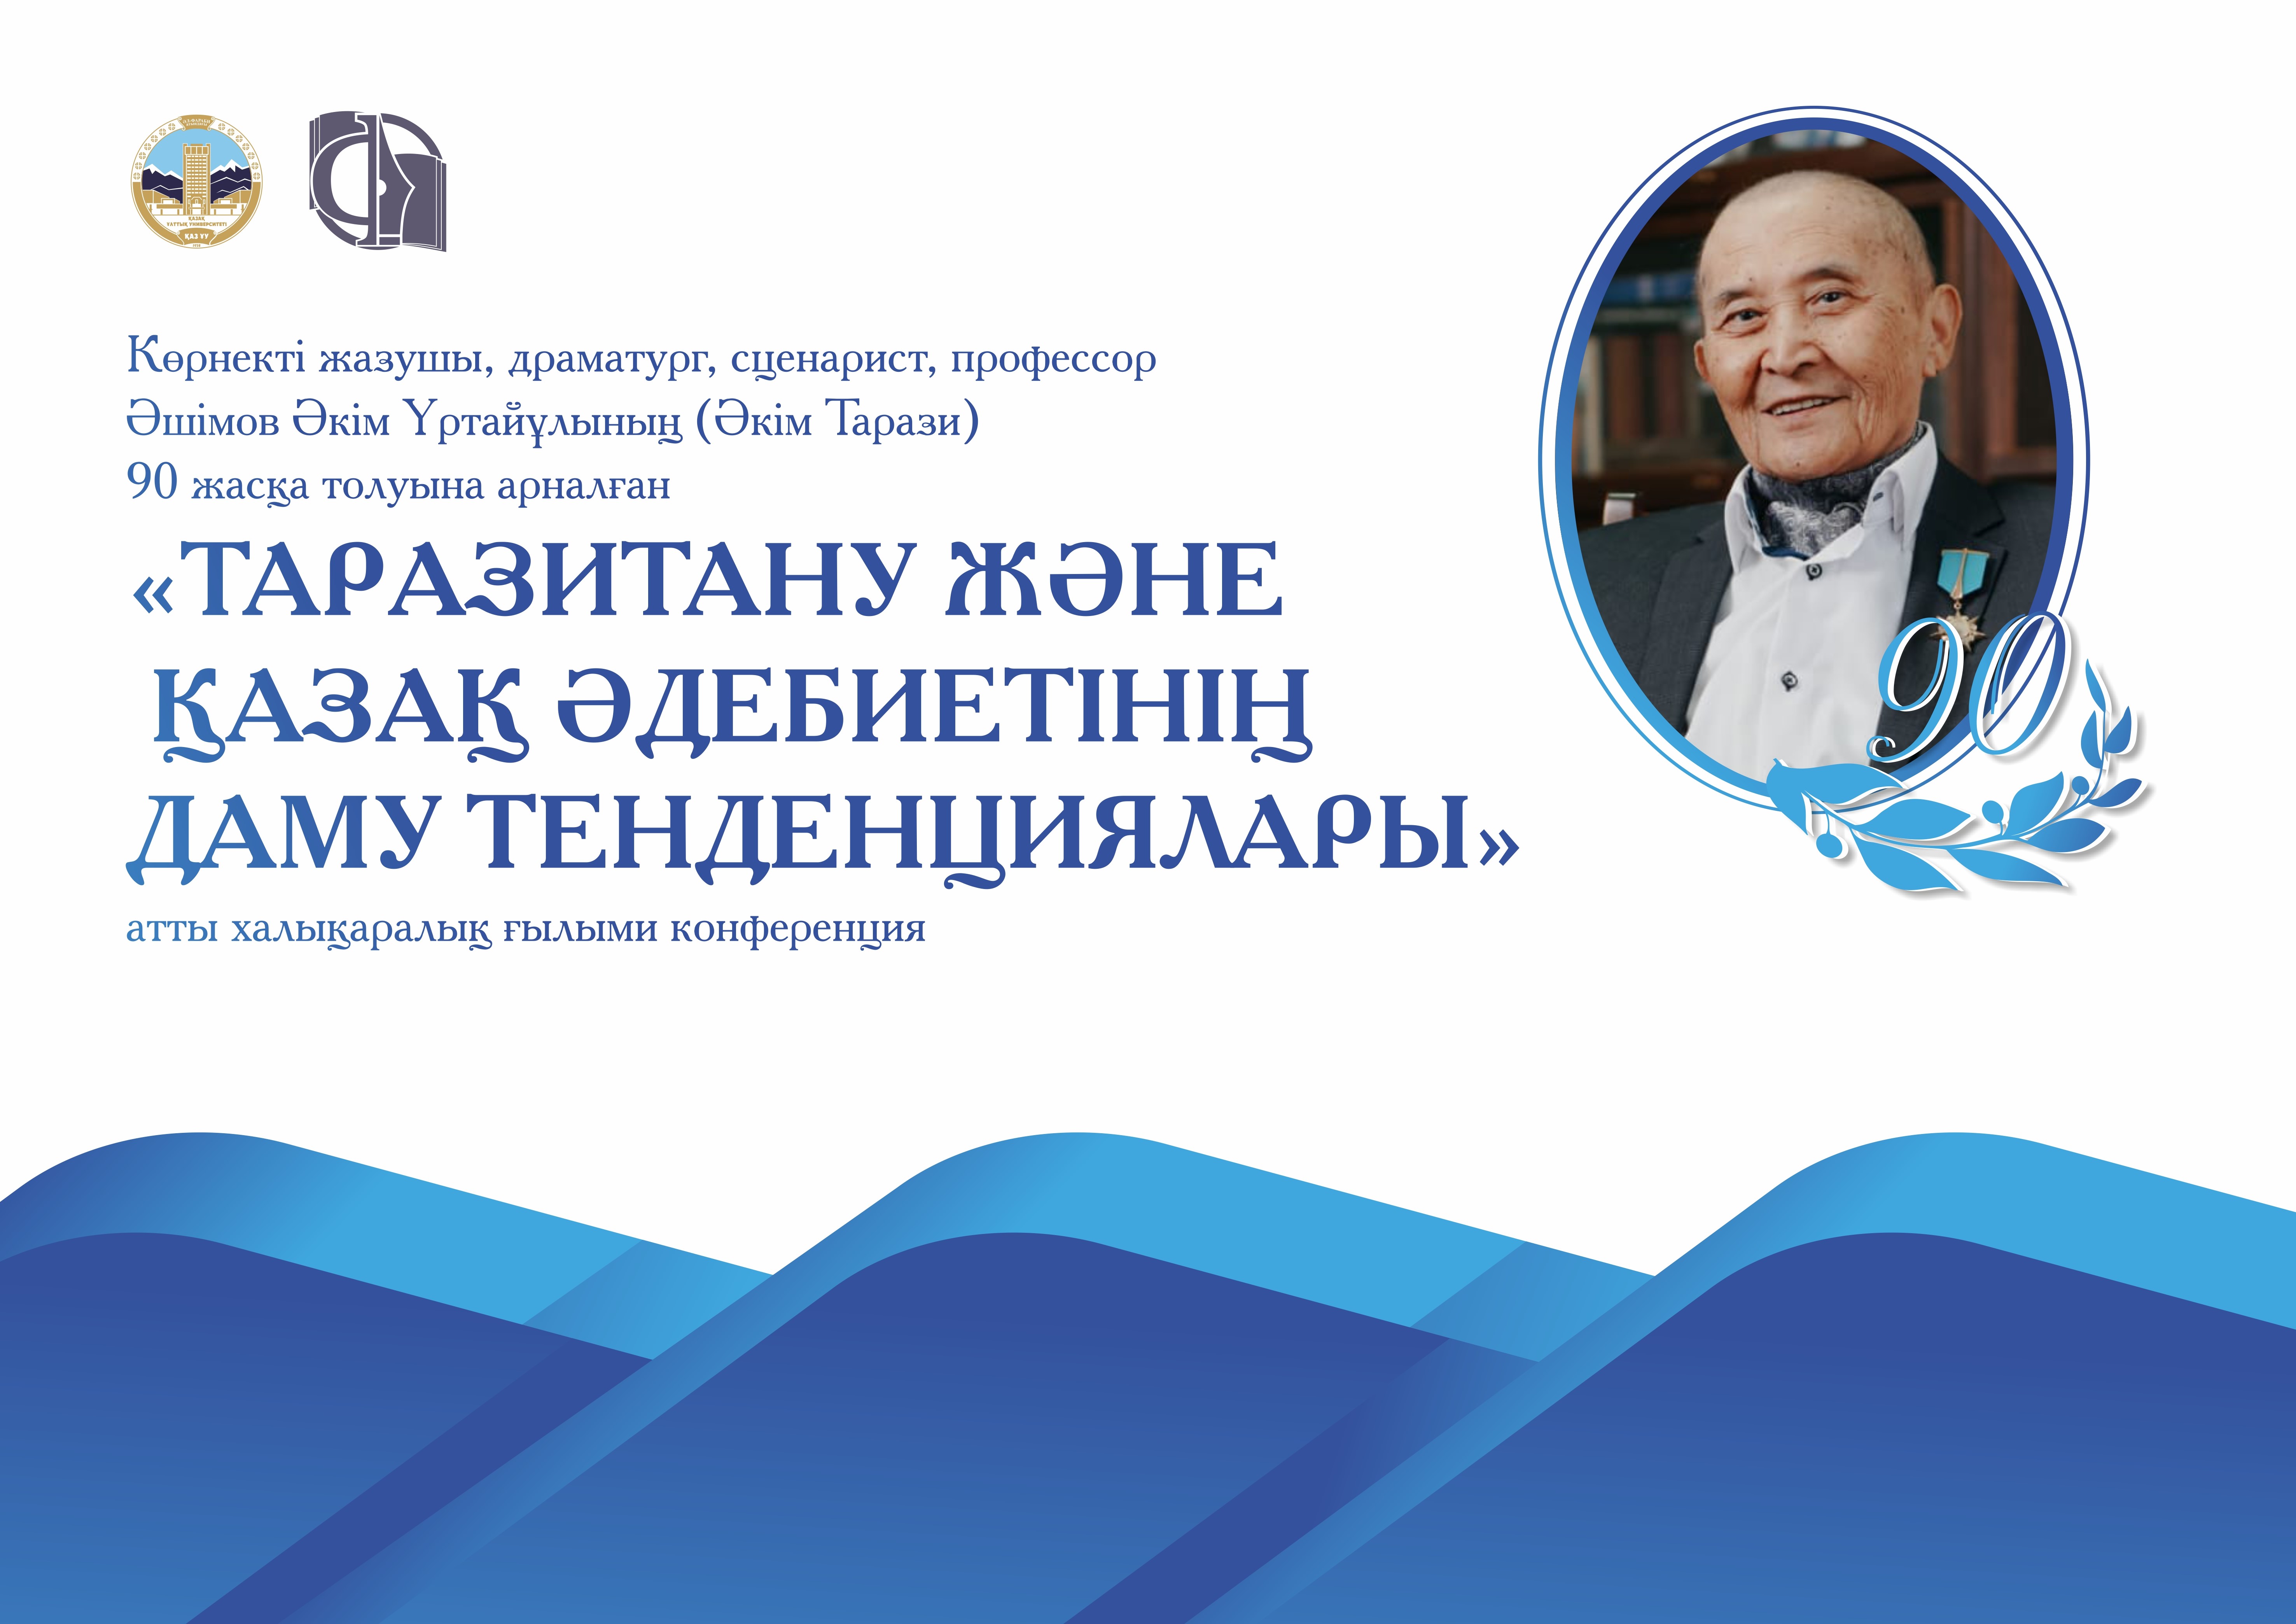 The international scientific and practical conference: "Taraz Studies and tendencies in the development of Kazakh literature" dedicated to the 90th anniversary of the Honored Worker of Kazakhstan, laureate of the State Prize of the Republic of Kazakhstan, Professor of the Kazakh National University of Arts, writer, playwright, screenwriter ASHIMOV AKIM URTAEVICH (AKIM TARAZI).